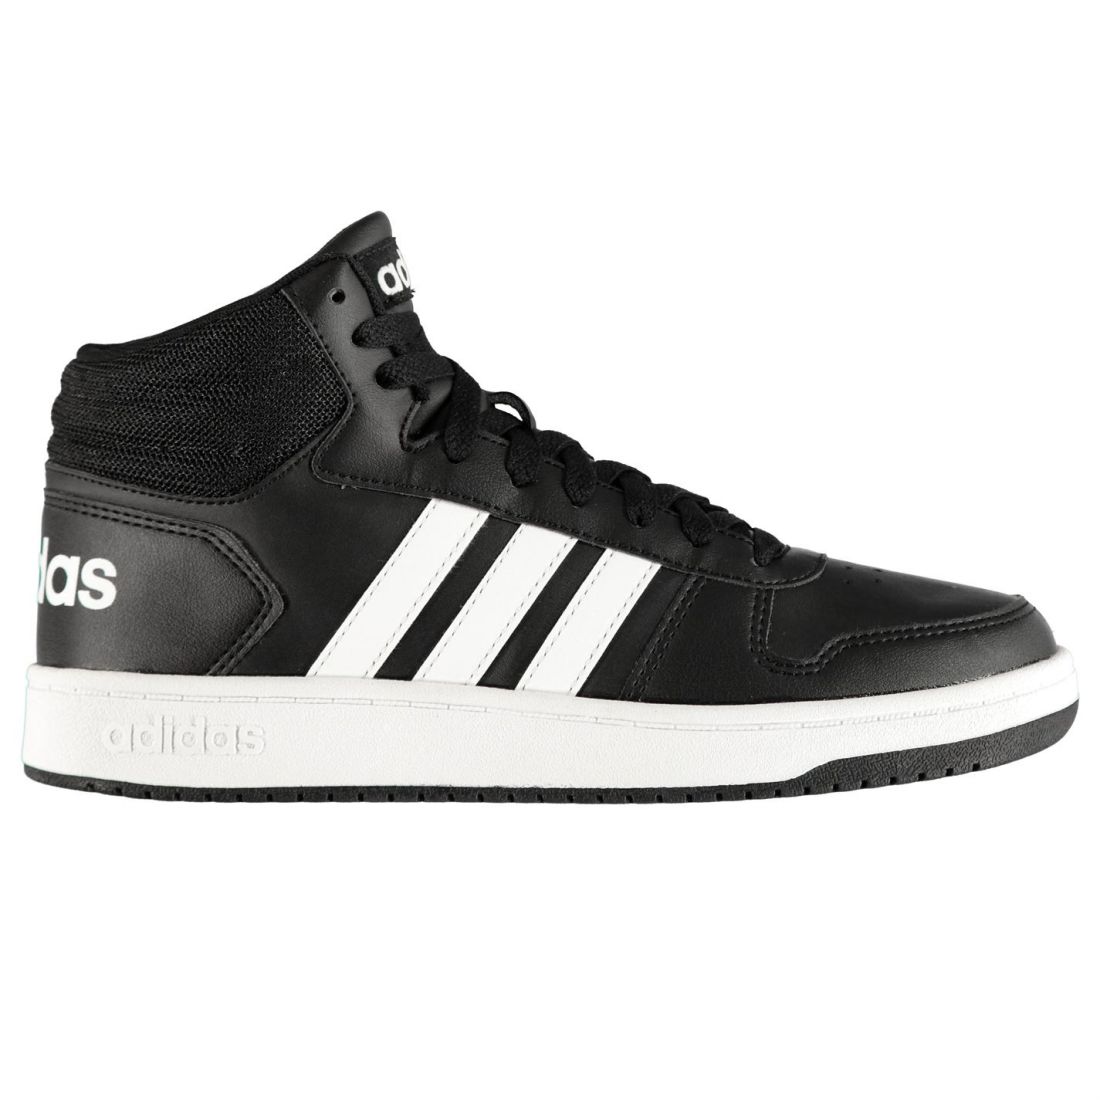 ADIDAS HOOPS MID Shoes Mens Gents High Top Laces Fastened Ventilated ...